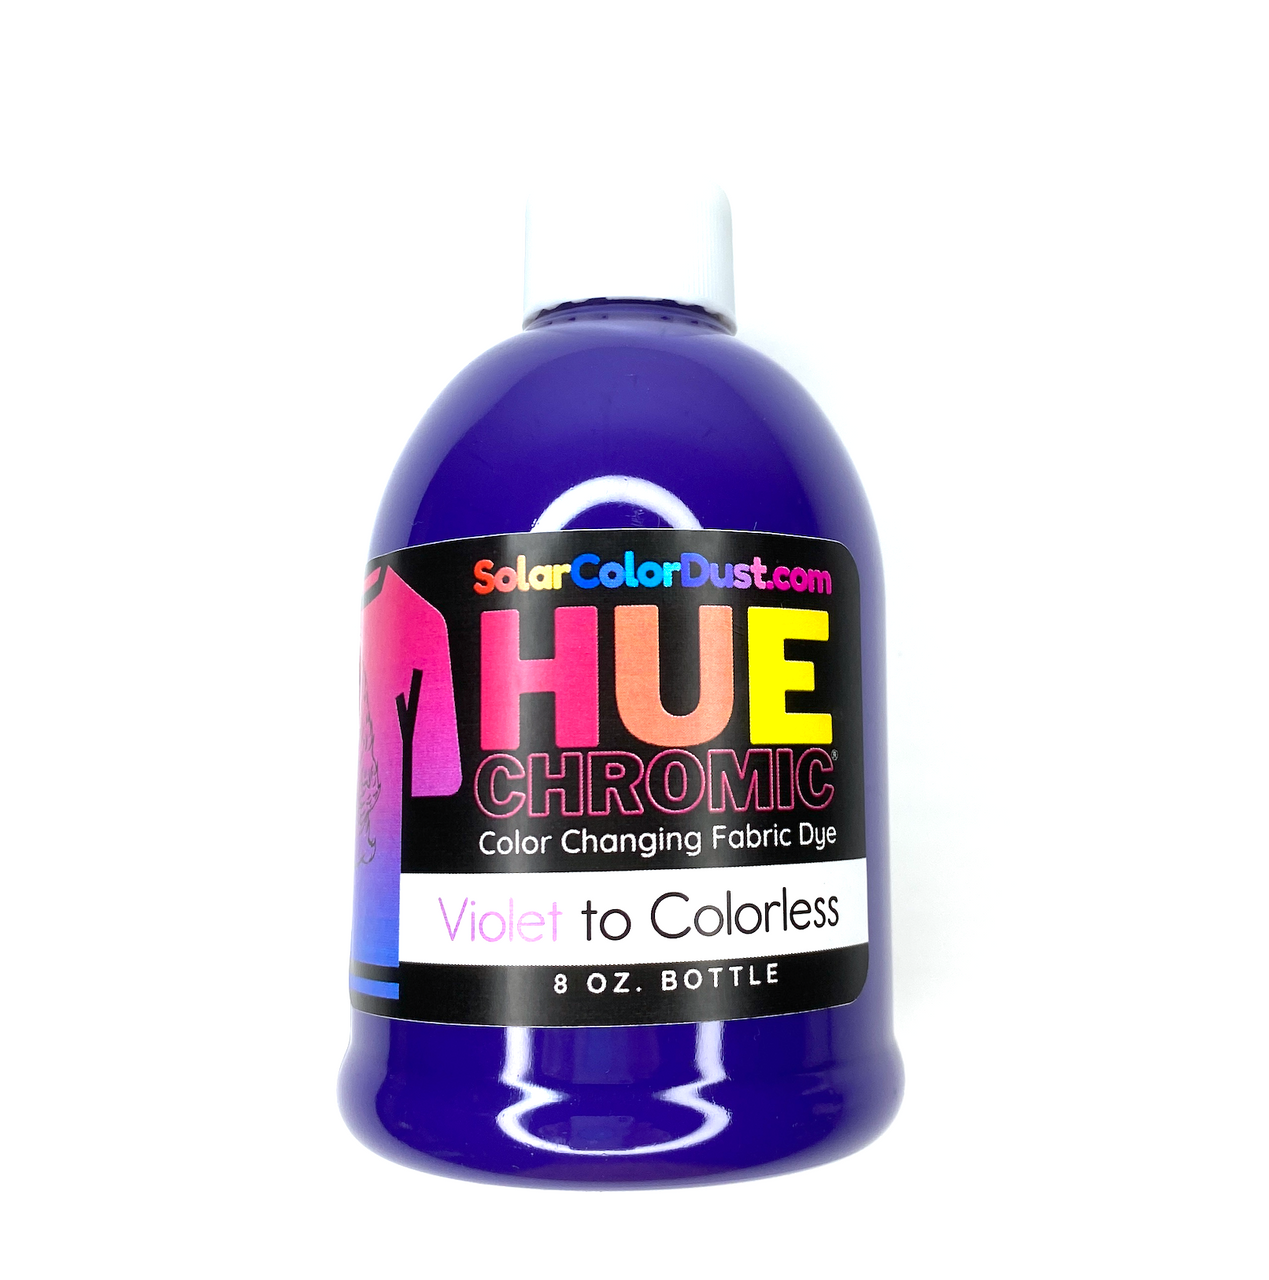 Hue Chromic® Fabric Dye - Violet to Colorless 